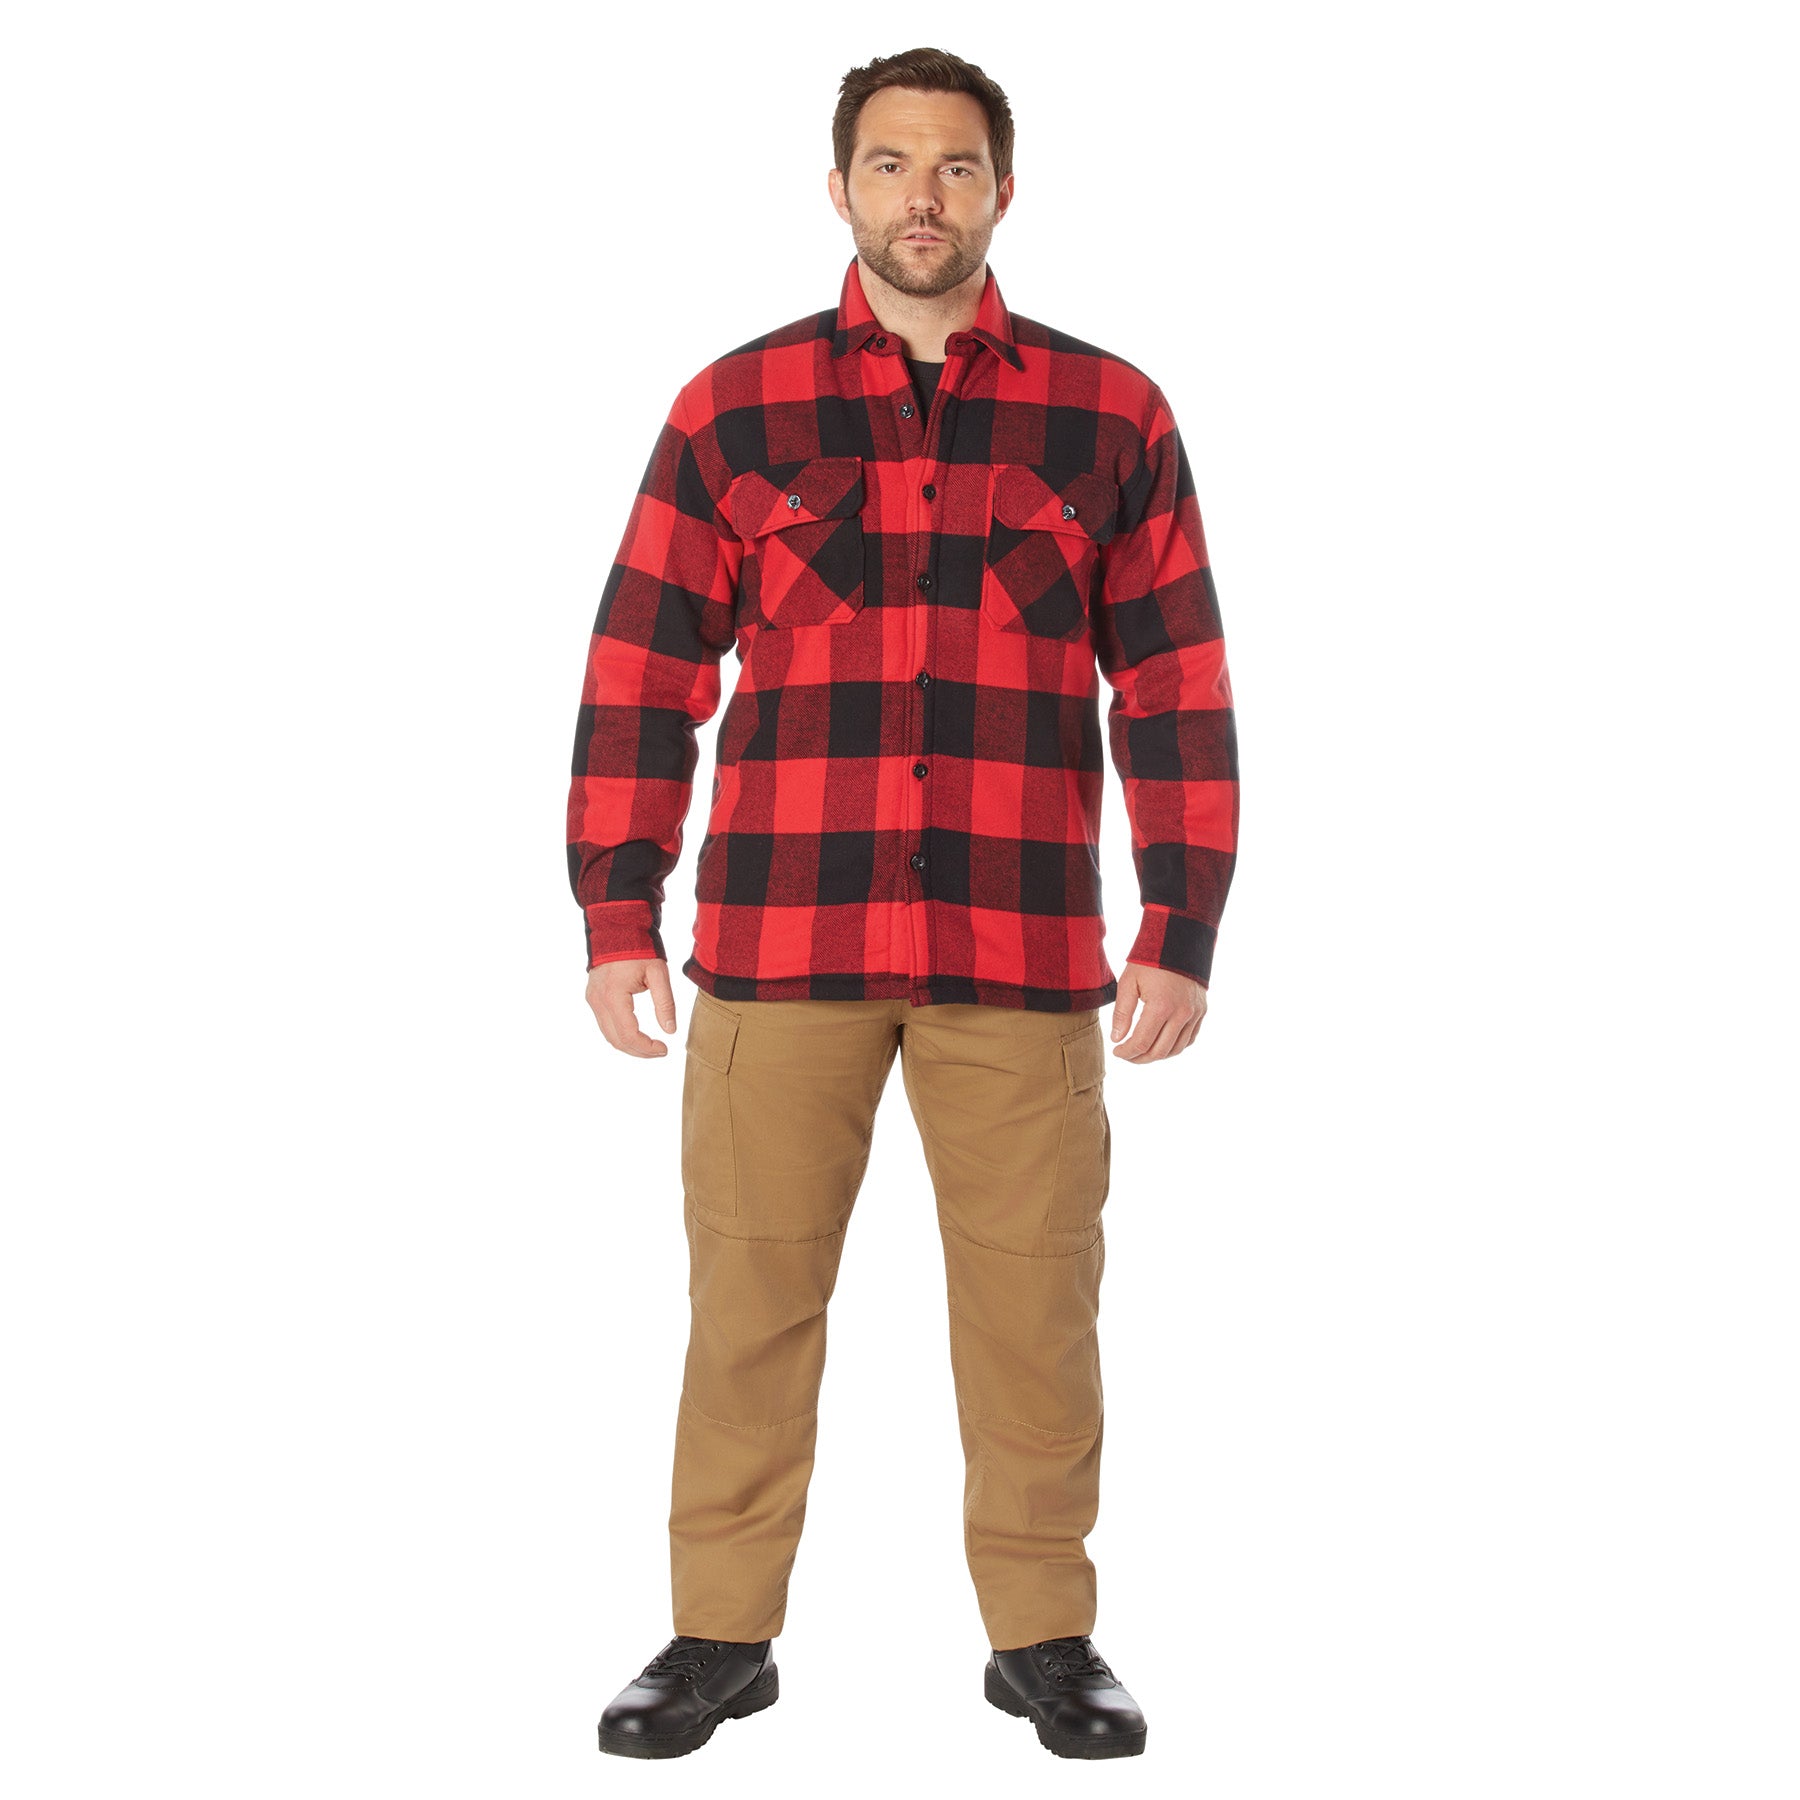 Lined Flannel Shirt - United States